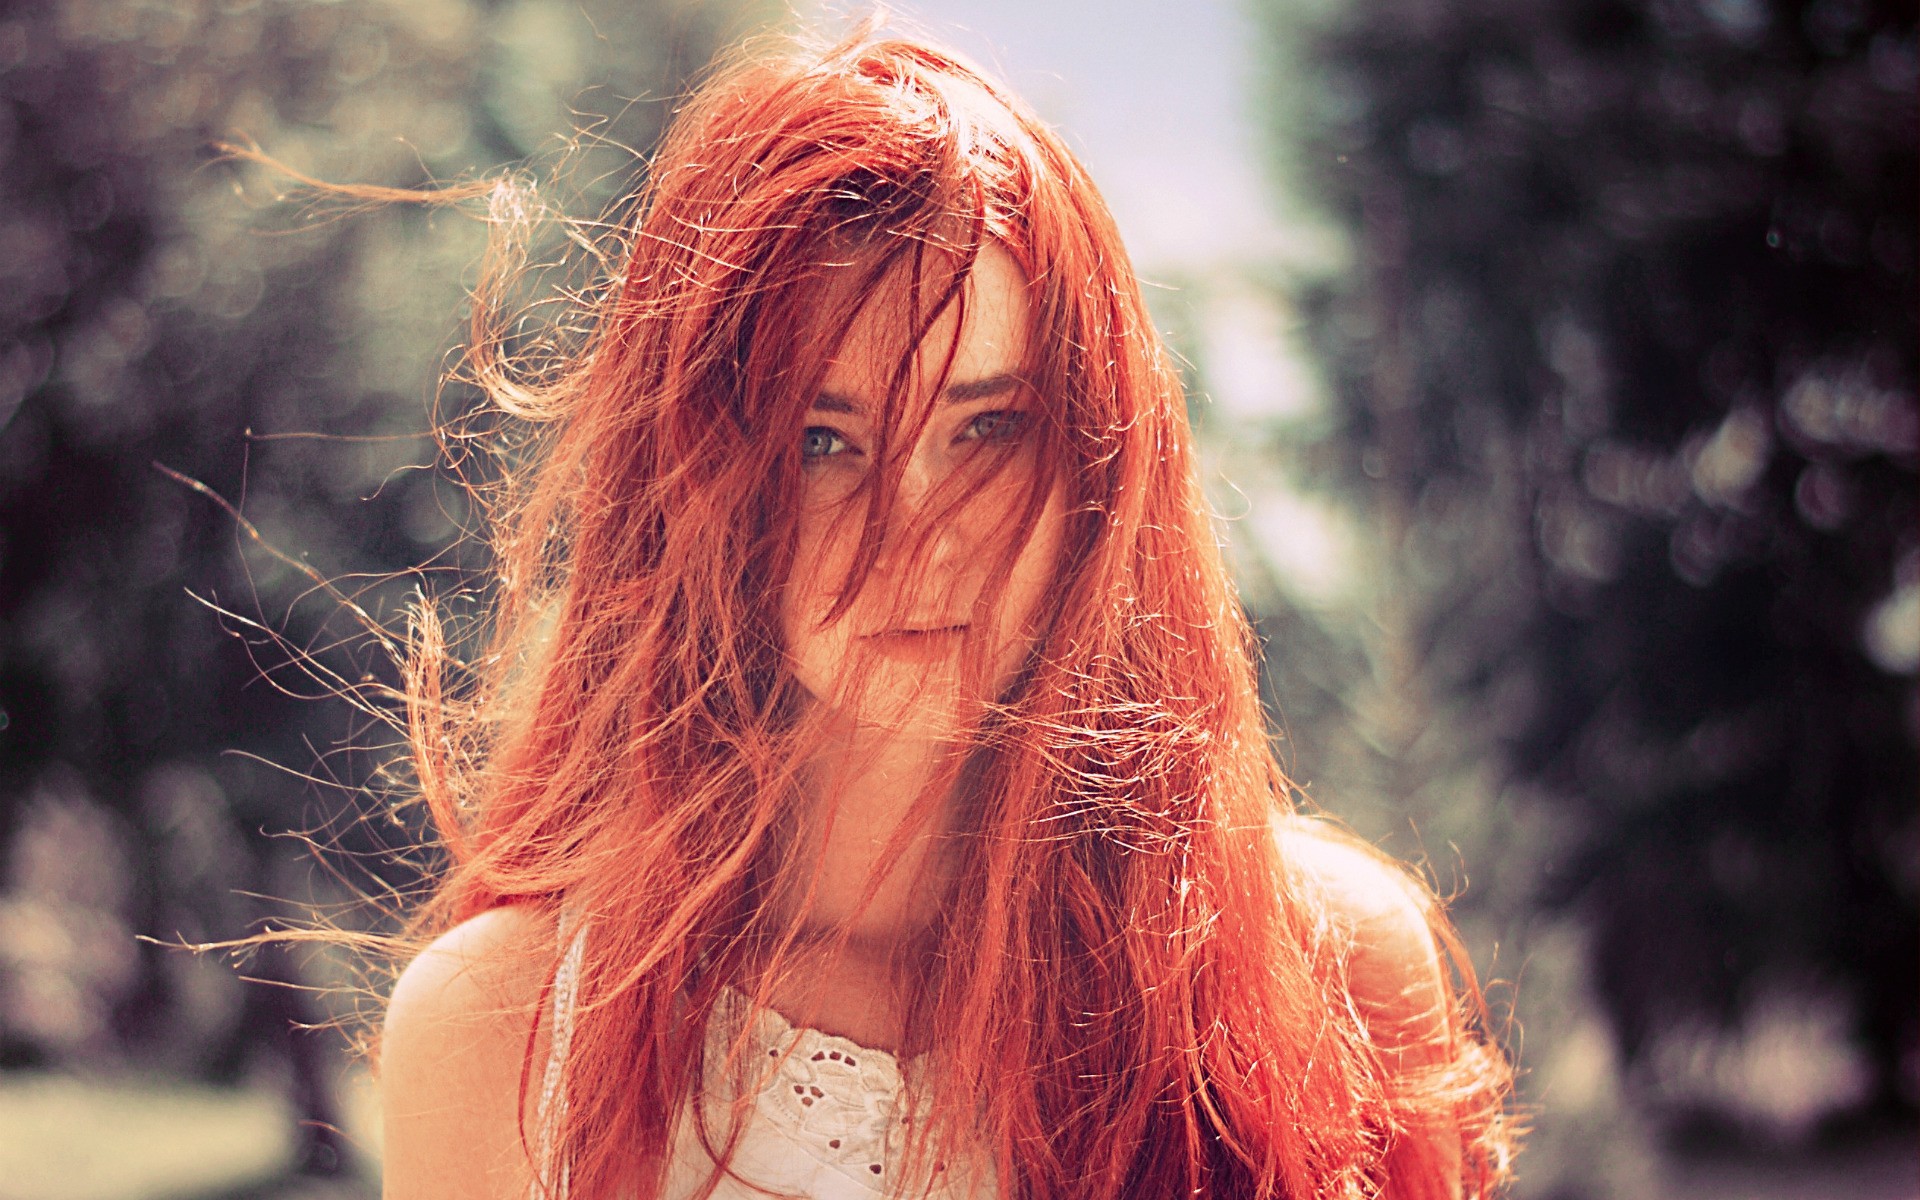 Redhead wallpapers and images - wallpapers, pictures, photos